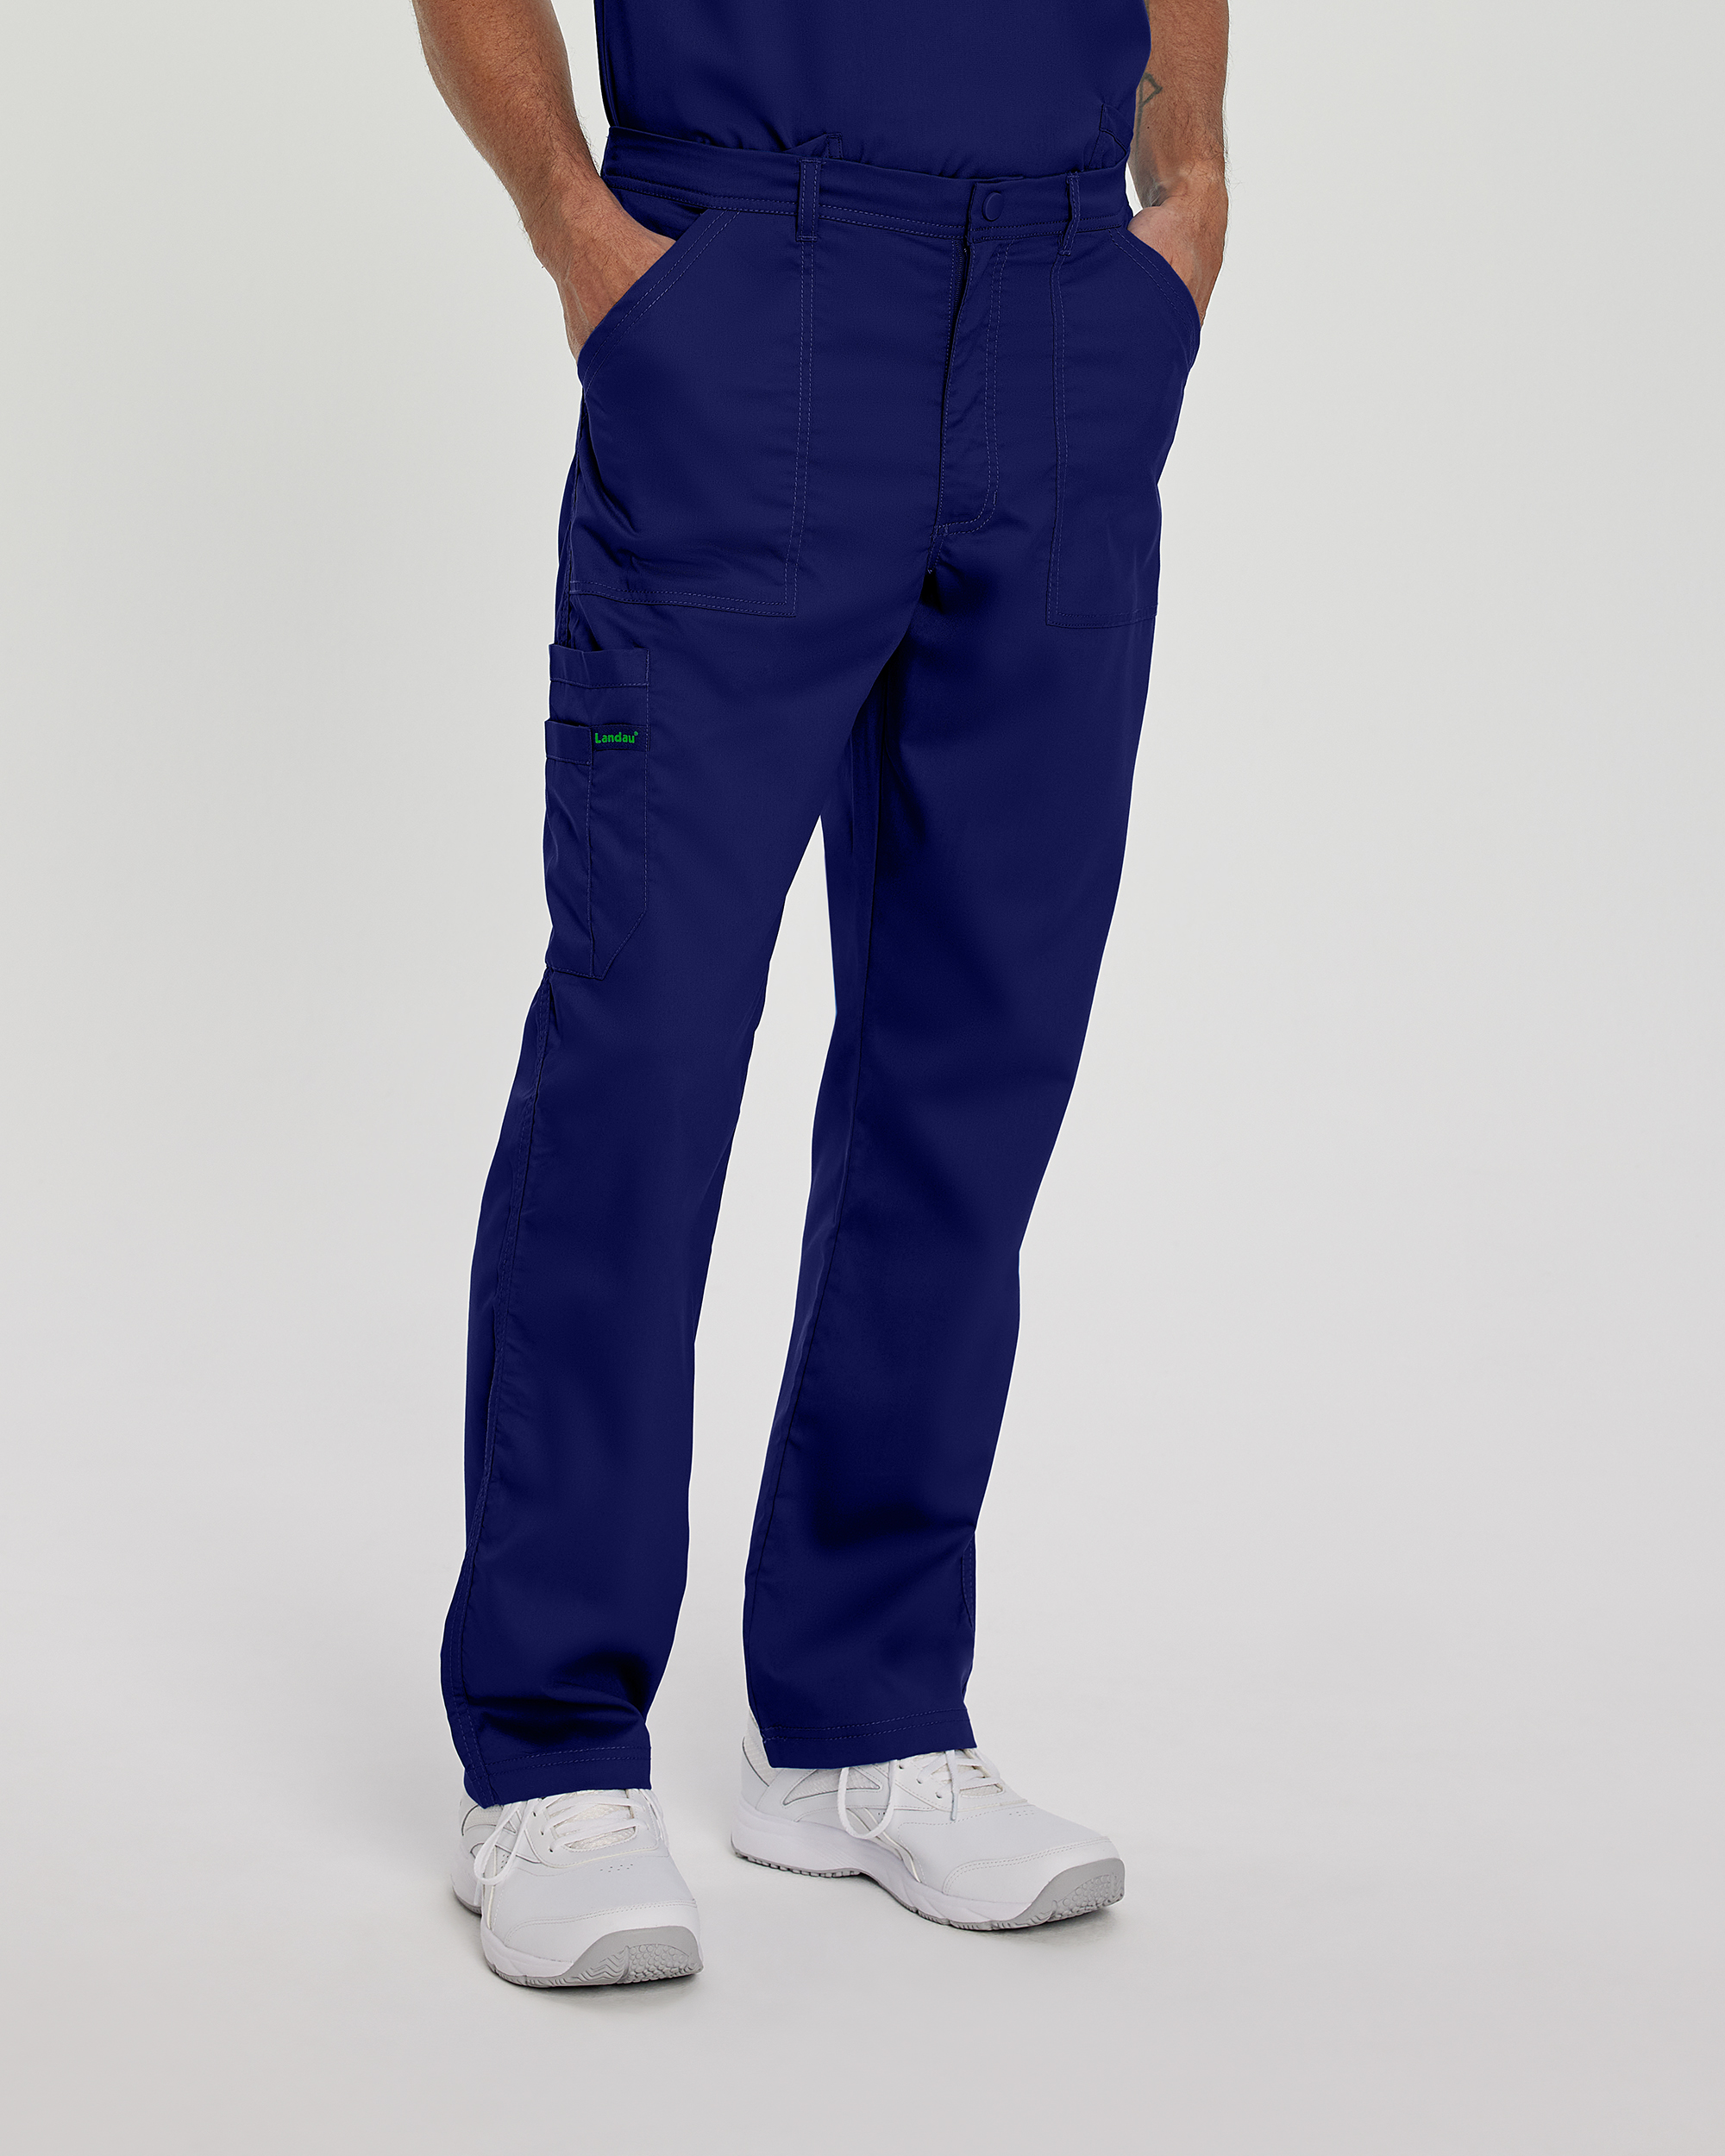 What material are the ProFlex Cargo Scrub Pants made of?